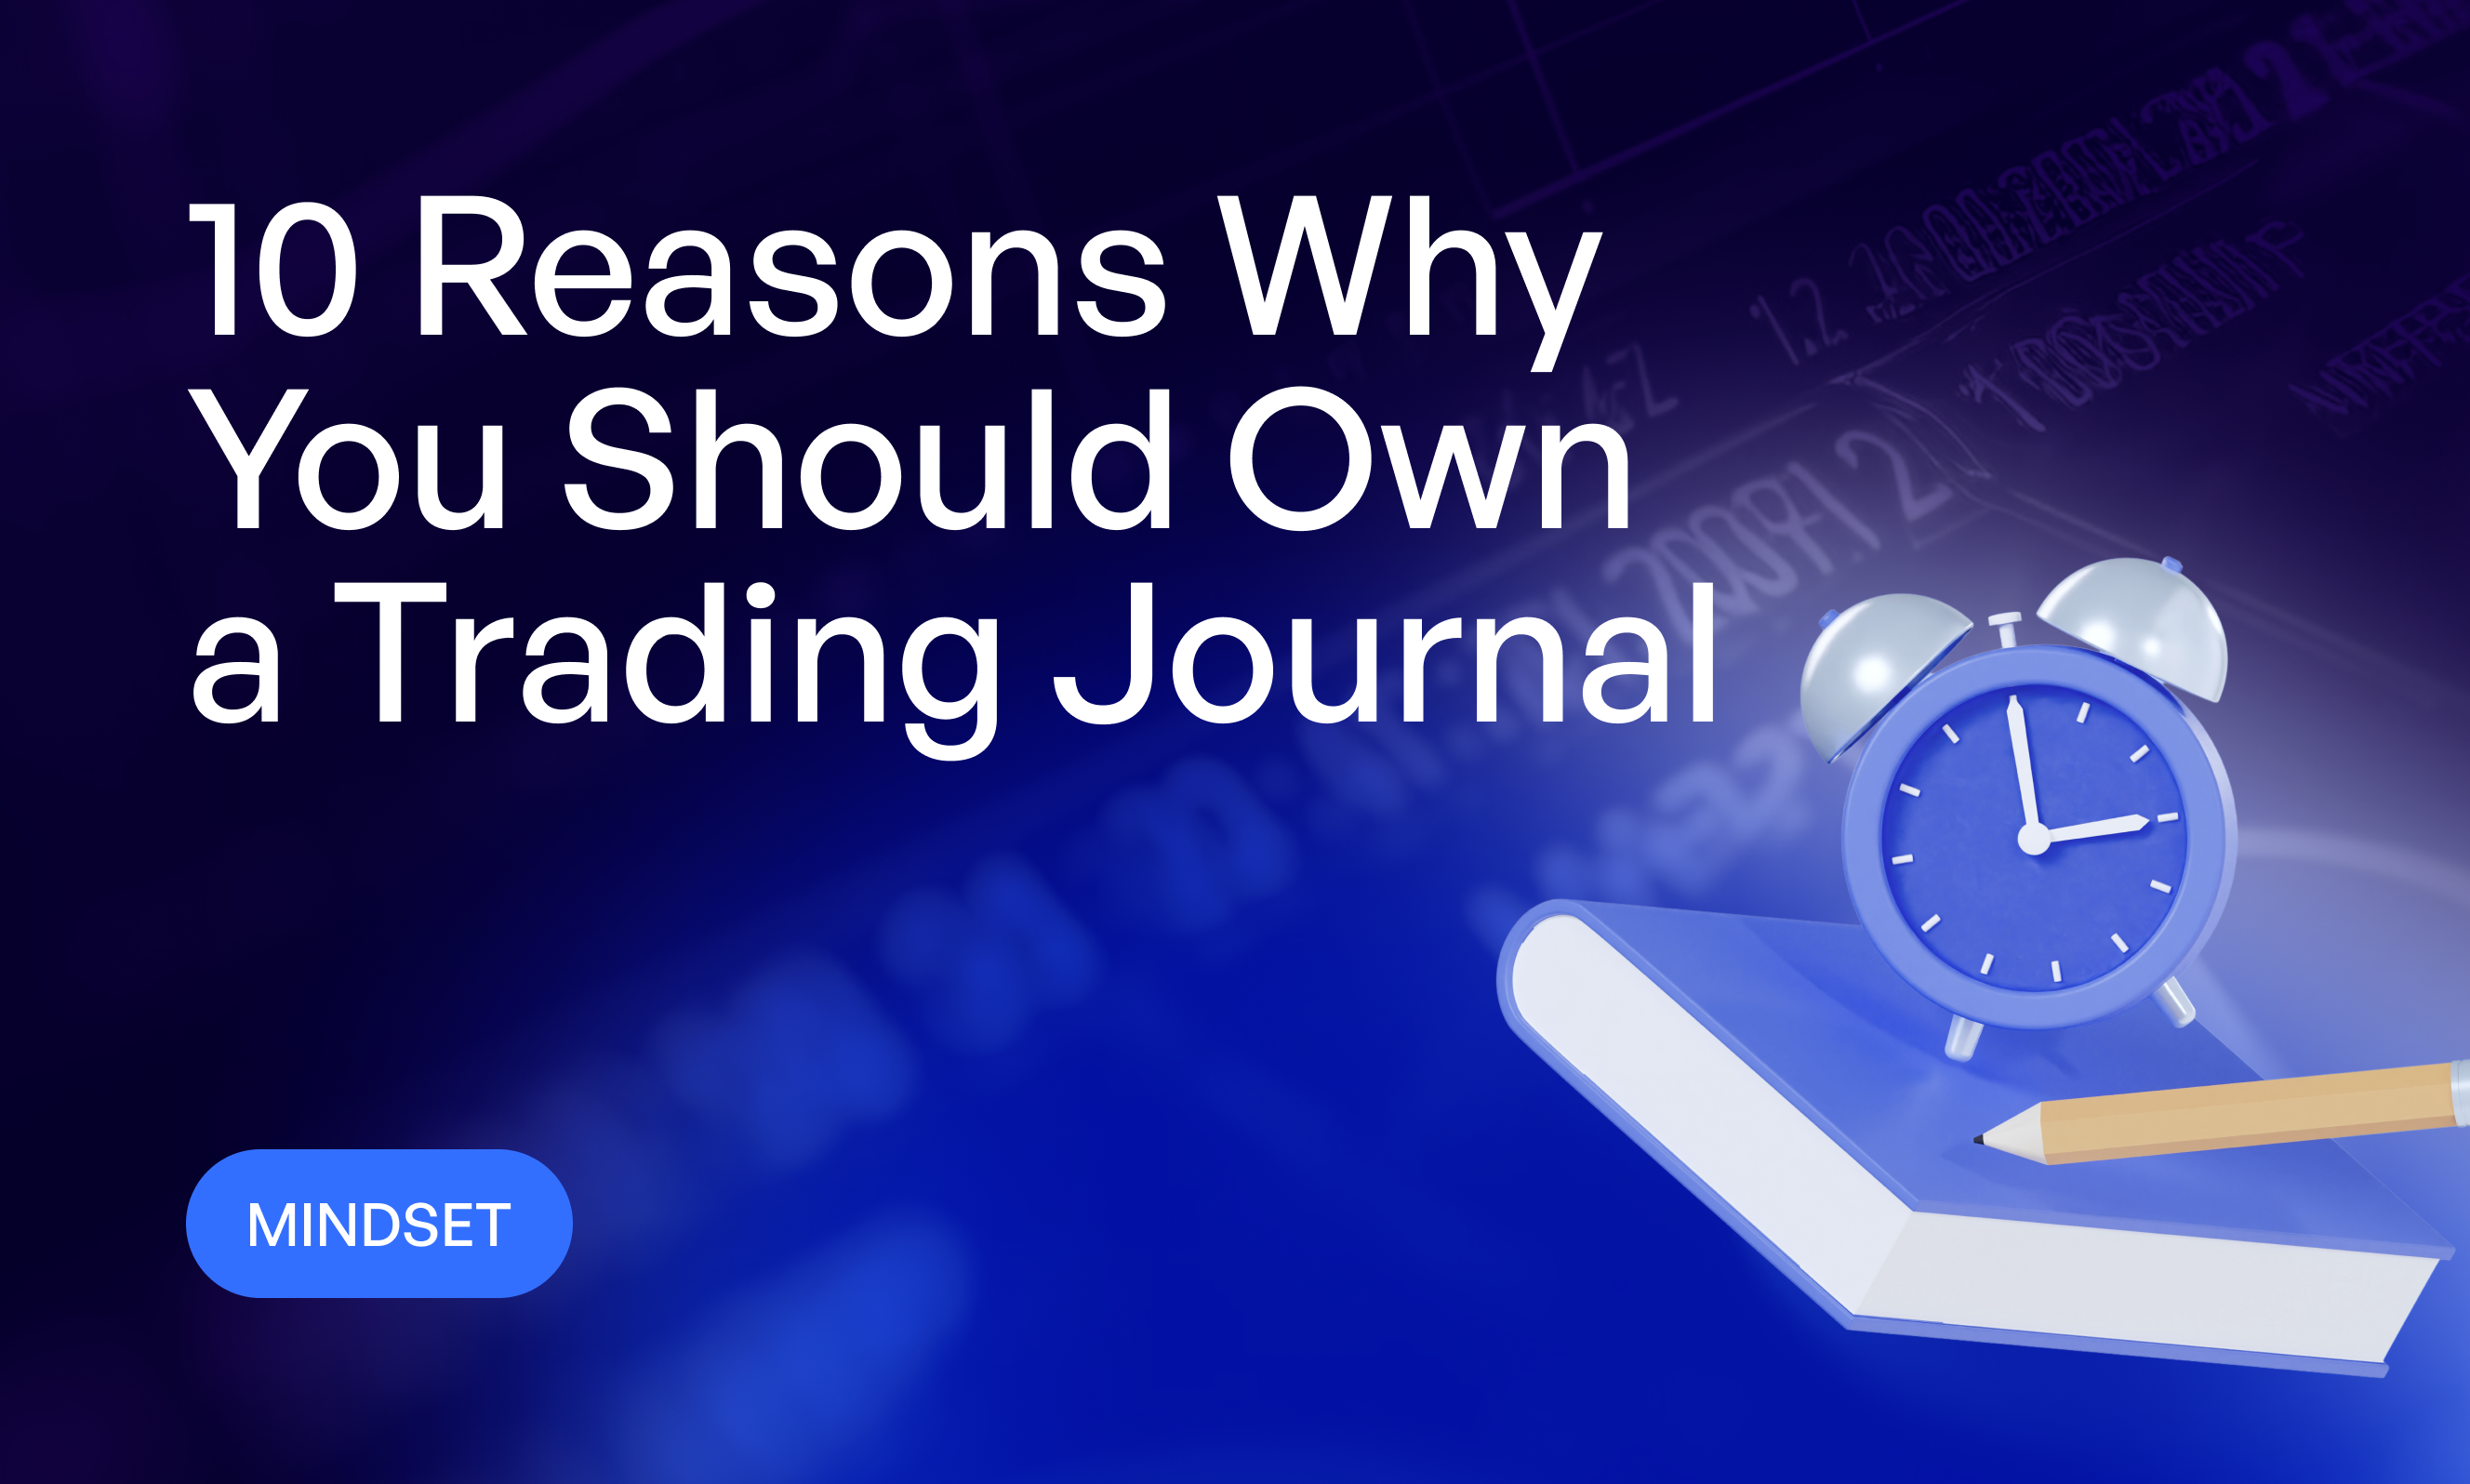 10 Reasons Why You Should Own a Trading Journal